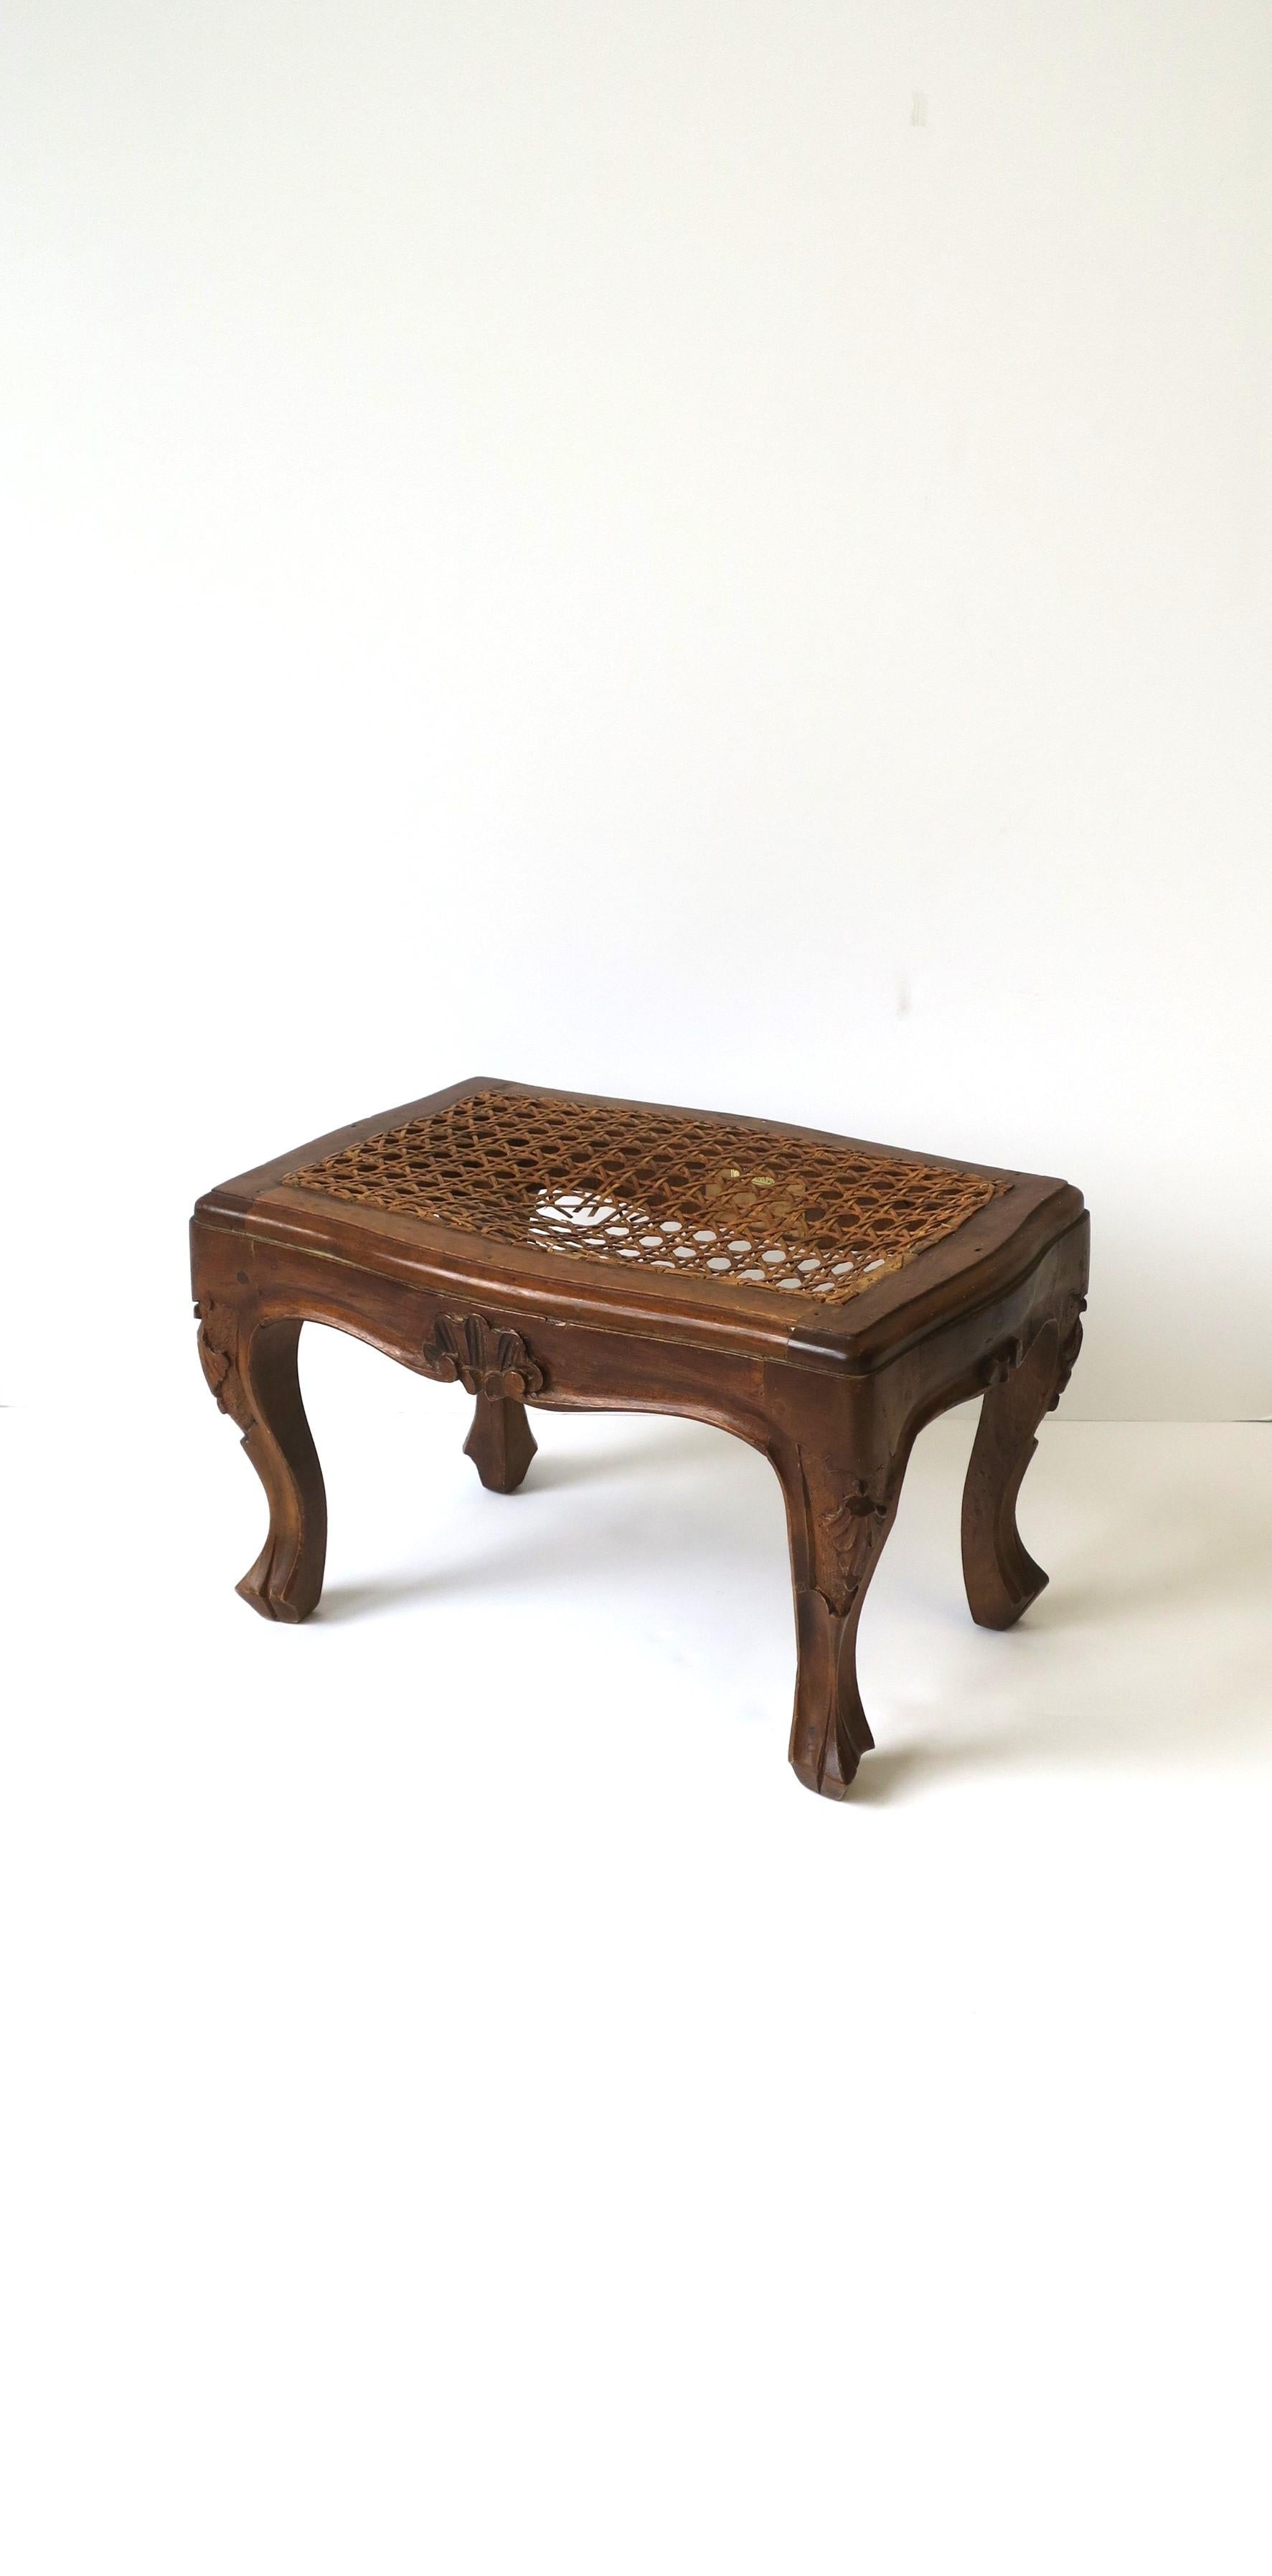 An Italian cane top wood stool / footstool with carving detail and cabriole leg in the Rococo style, circa mid to late-20th century, Italy. Piece was made for Neiman Marcus as per label on underside and as shown in last image. Piece can also be used